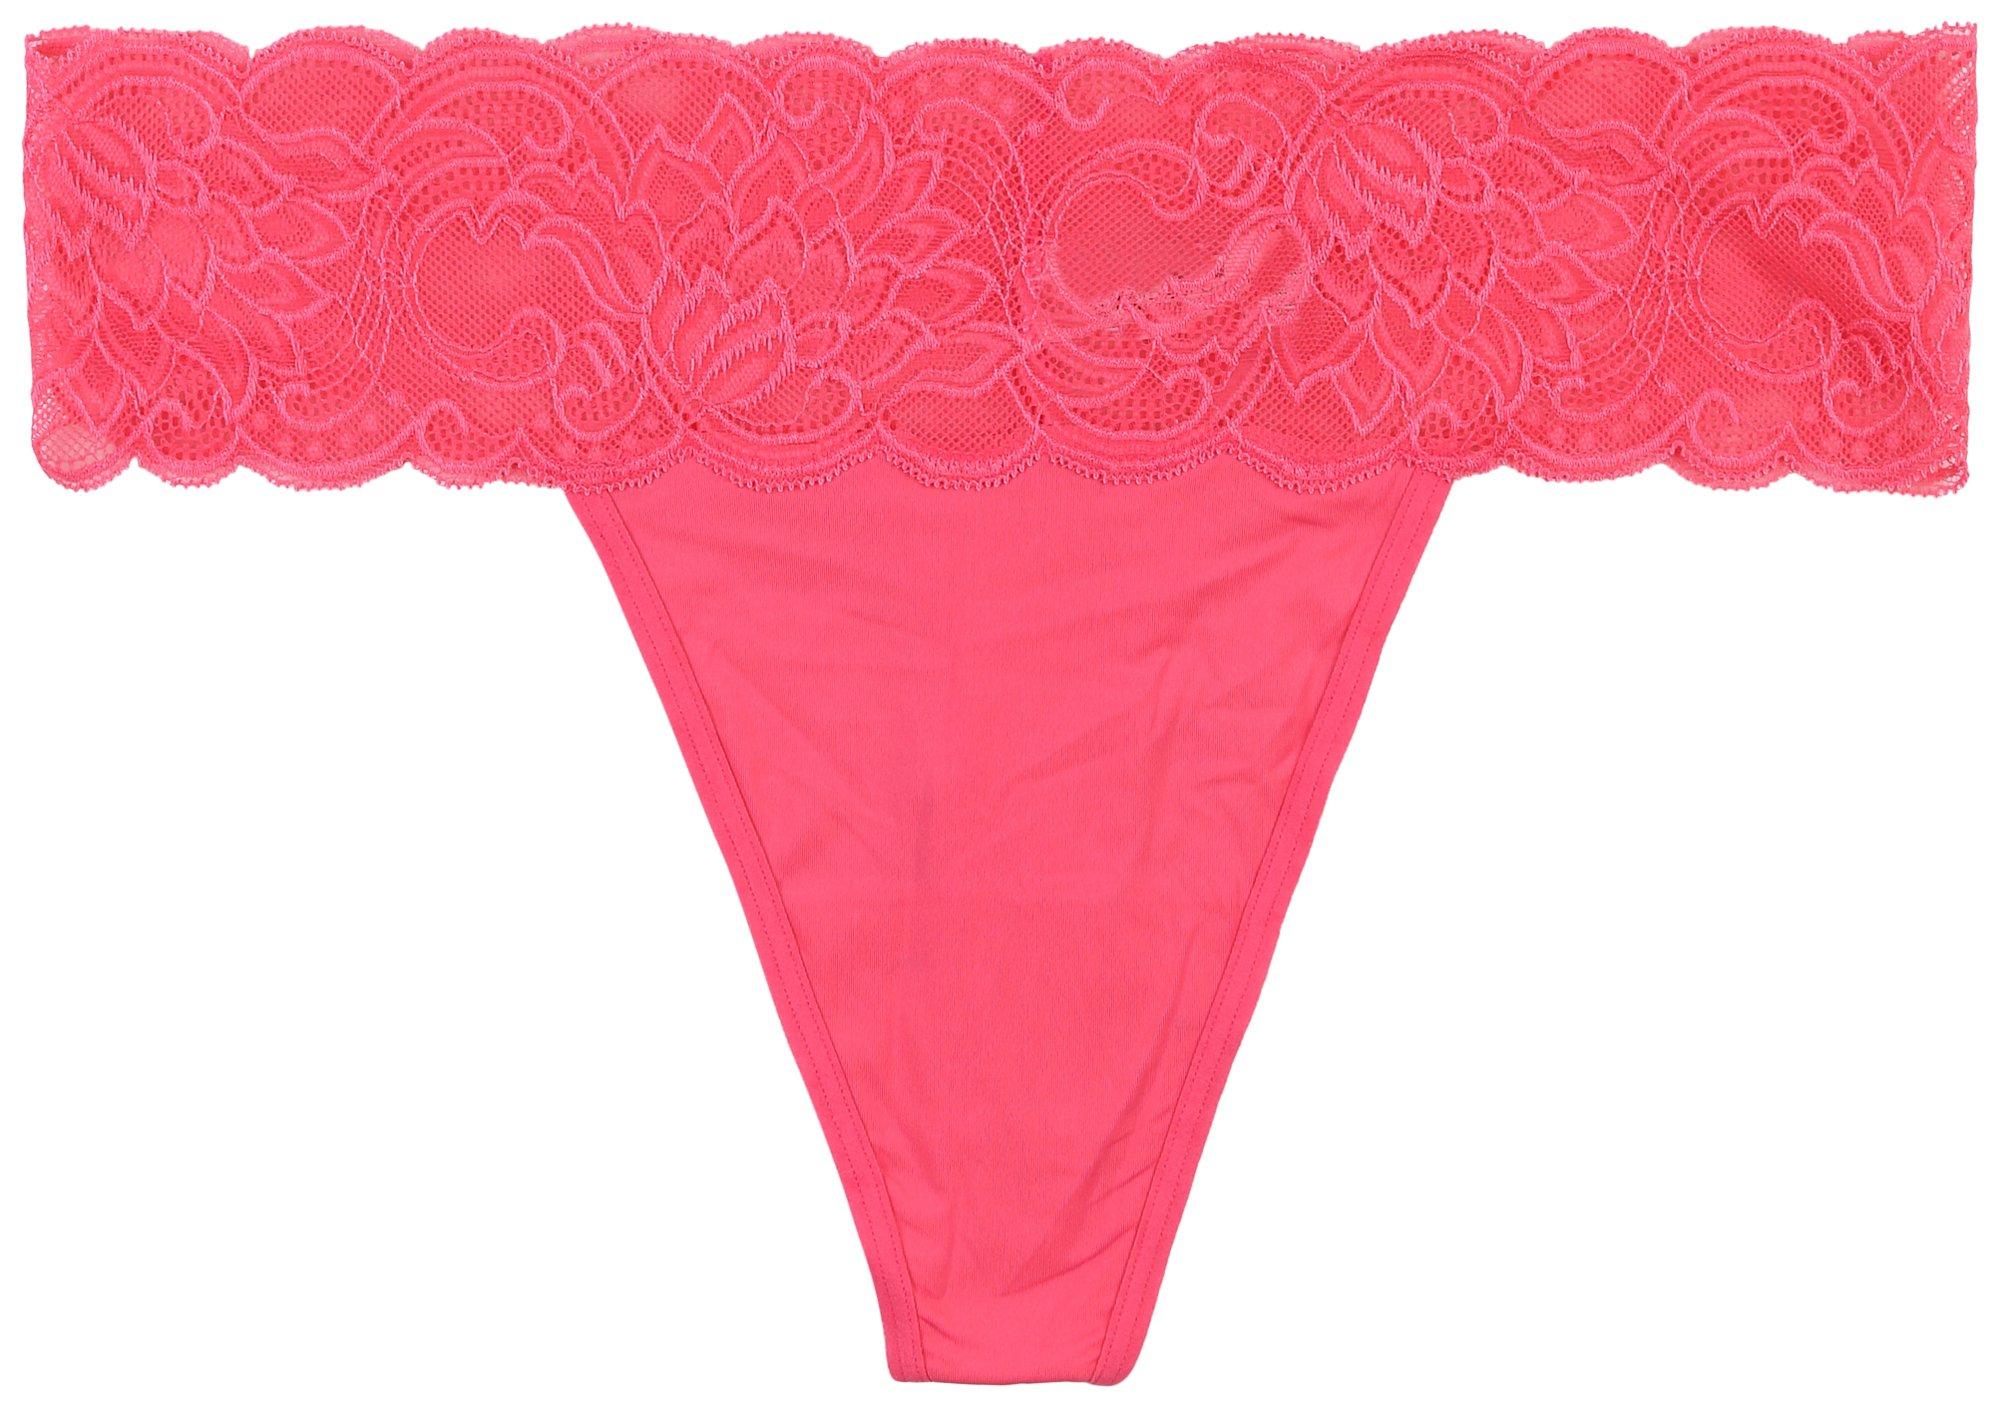 Maidenform Luxurious Lace Thong Panties DMESLT